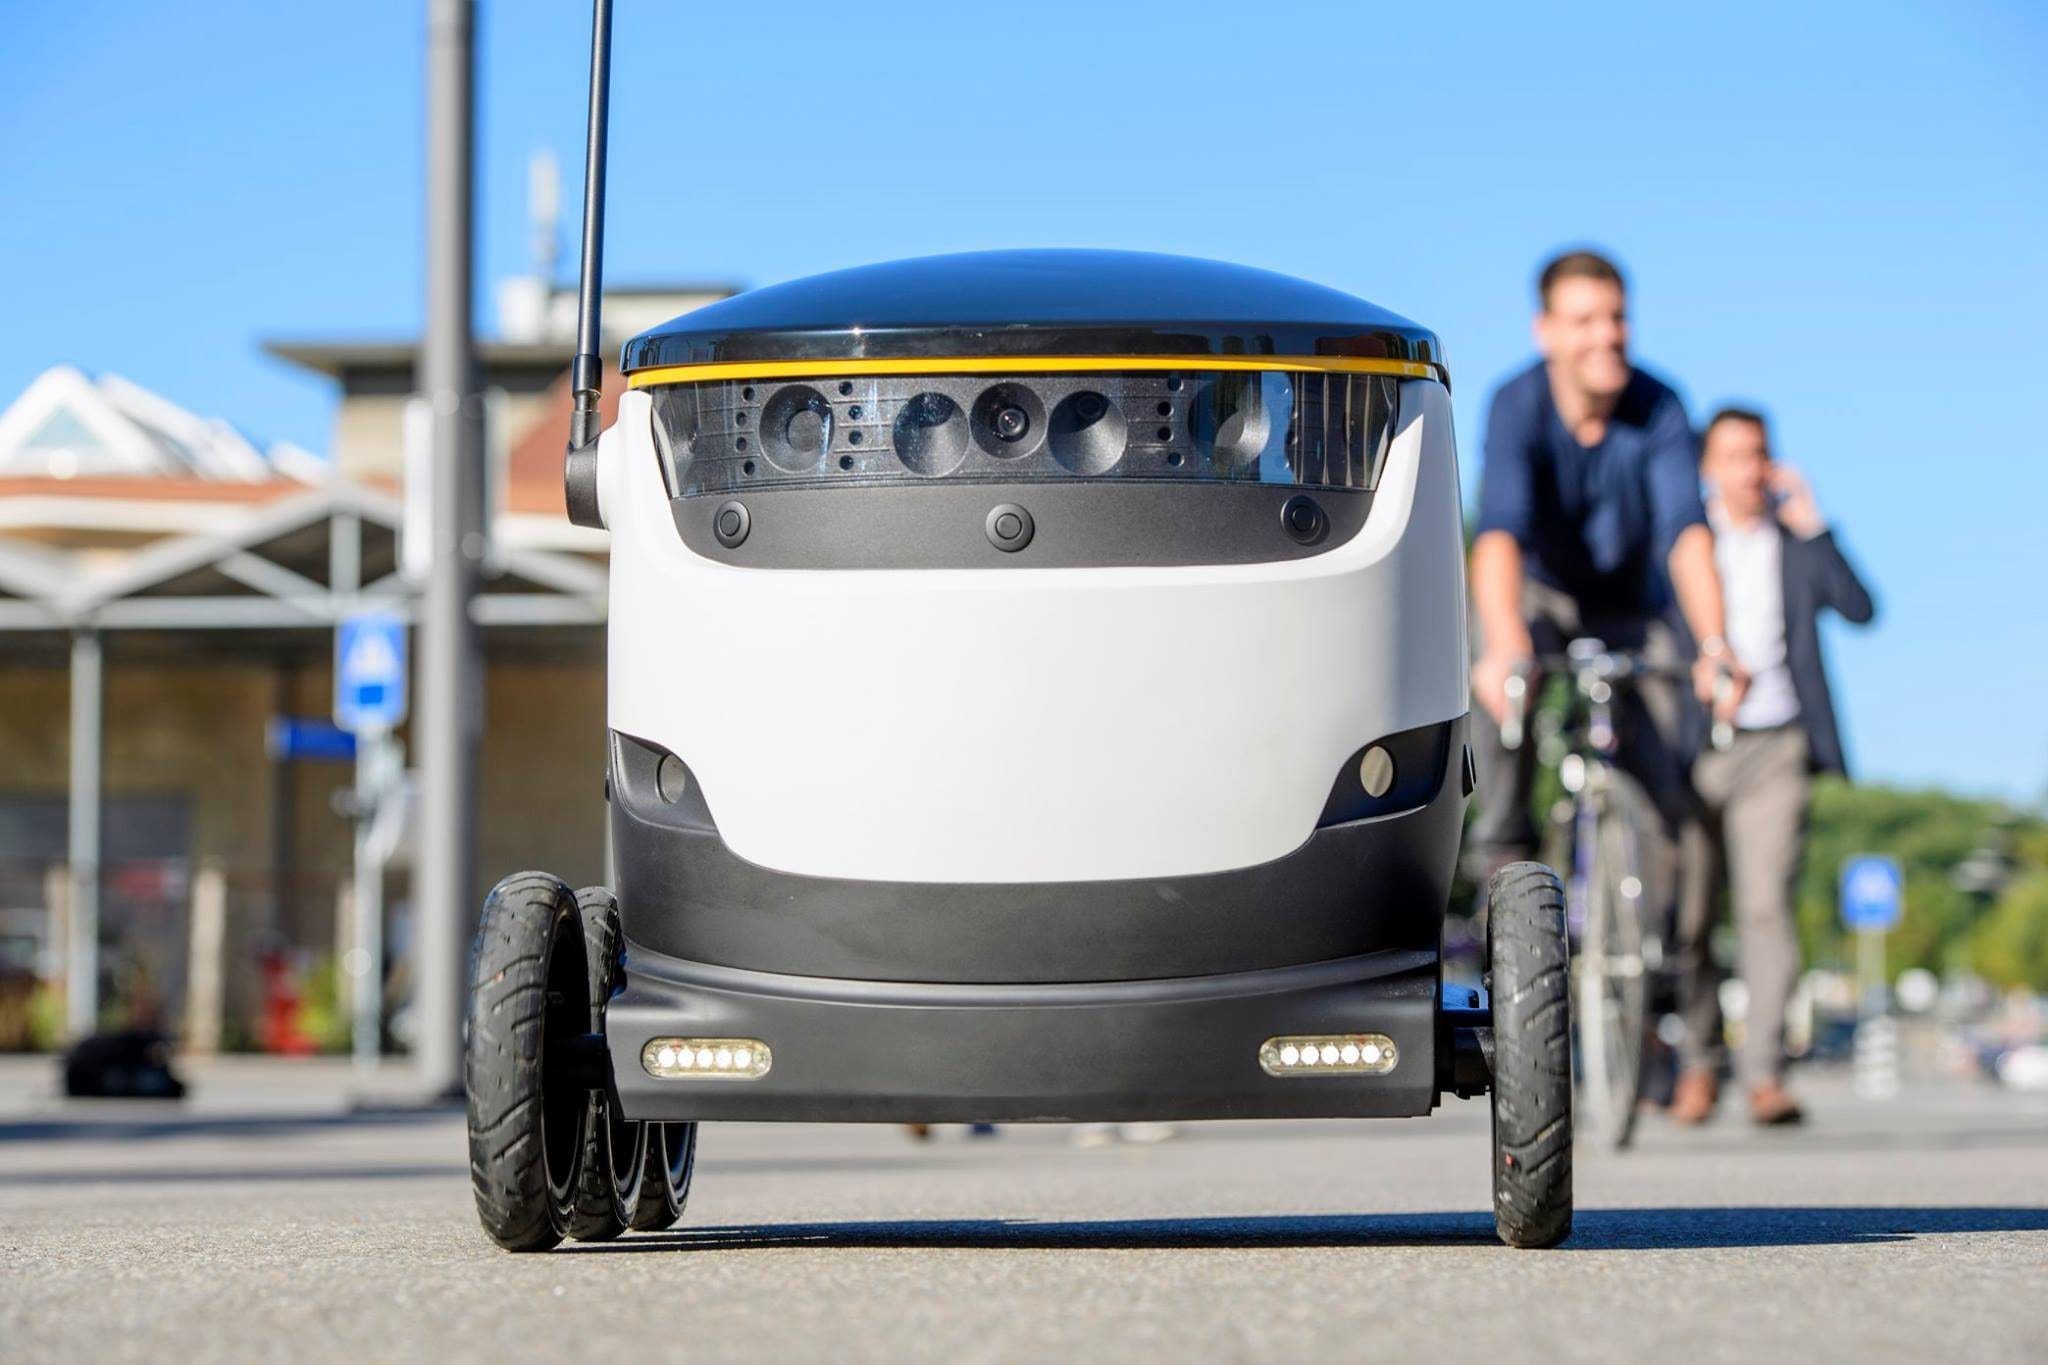 home delivery robots